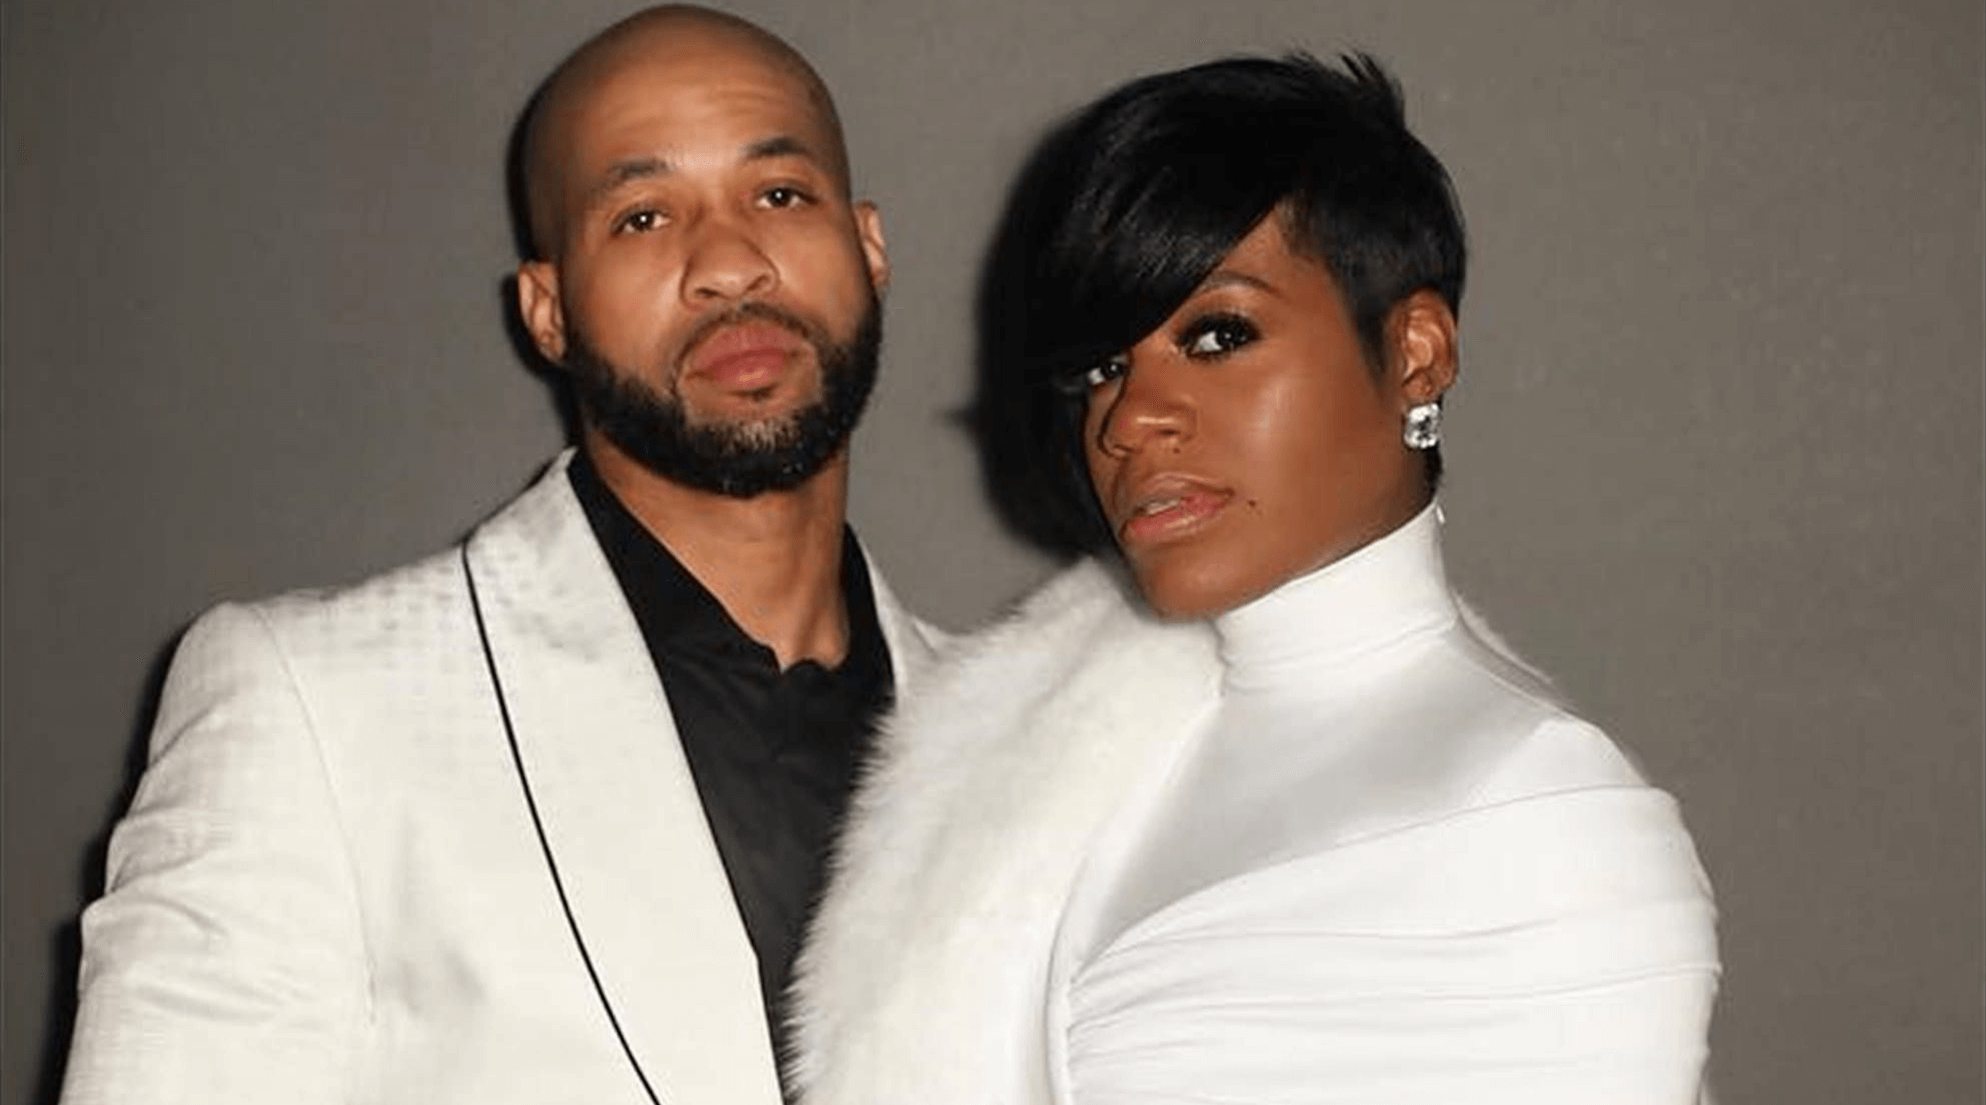 'American Idol' Alum Fantasia Barrino Is Pregnant Years After